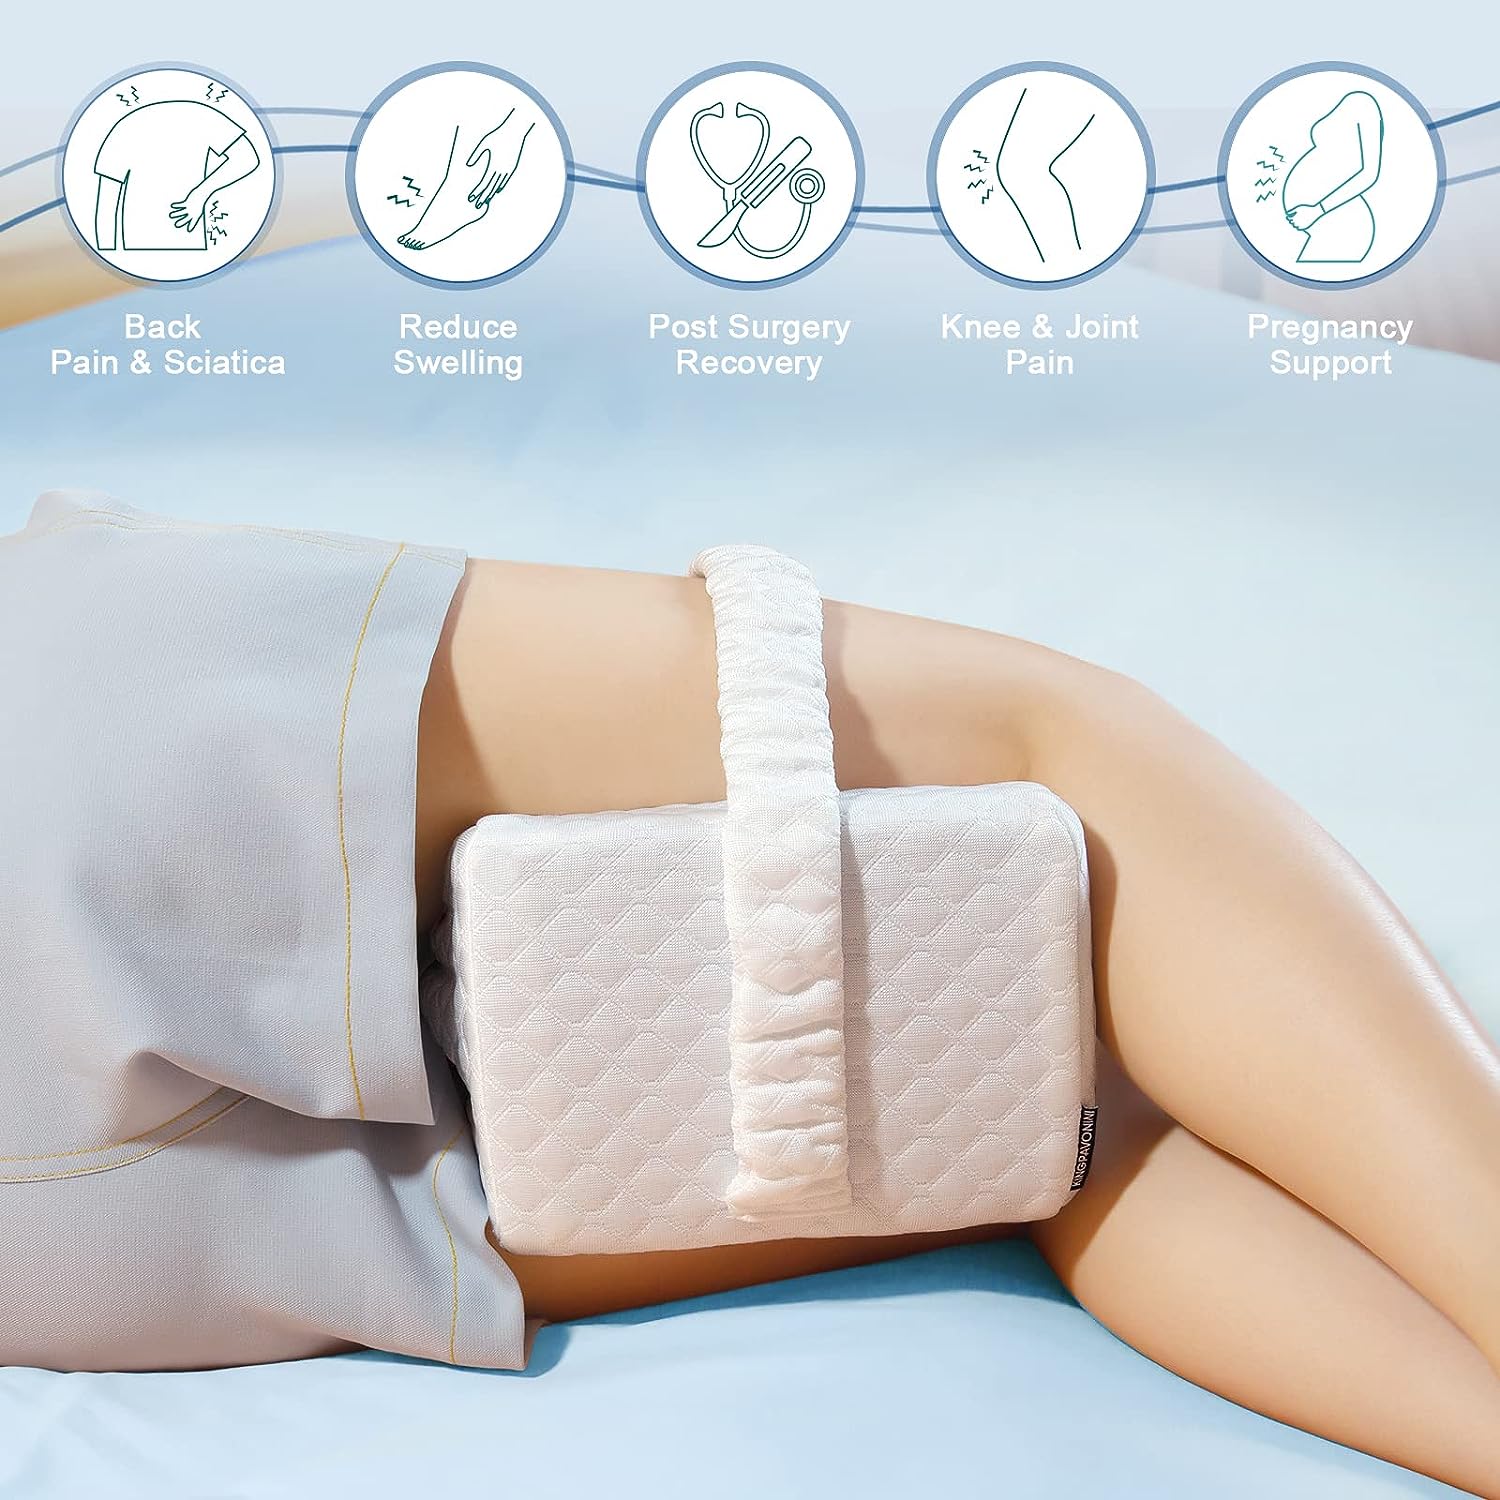 KingPavonini Shoulder Ice Pack Wrap and Cooling Knee Pillow for Side  Sleepers